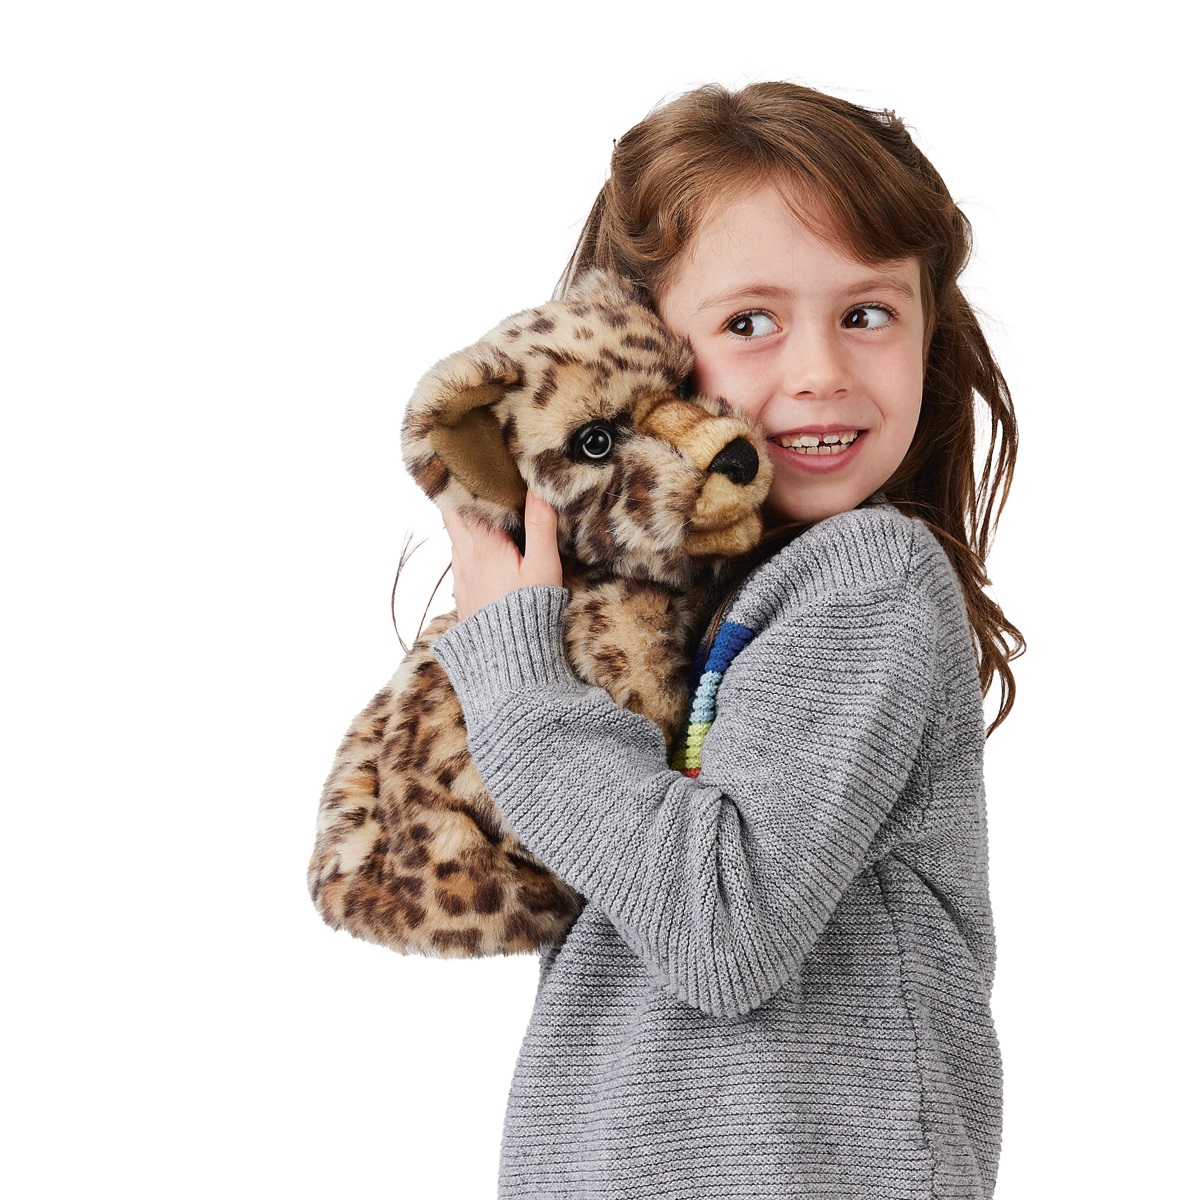 Leopard Cub Stage Puppet   DUE JULY